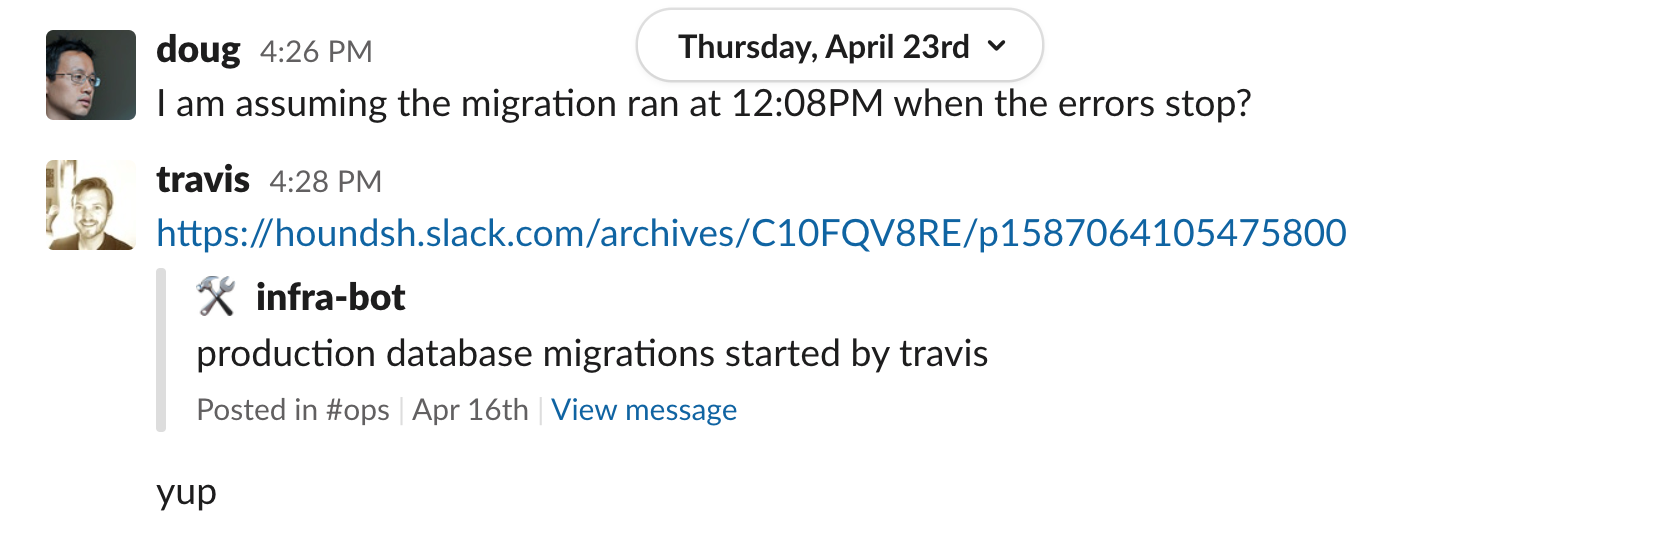 doug 4:26 PM I am assuming the migration ran at 12:08PM when the errors stop? travis 4:28 PM shared message from infra-bot posted in #ops channel on April 16th production database migrations started by travis travis 4:28 yup